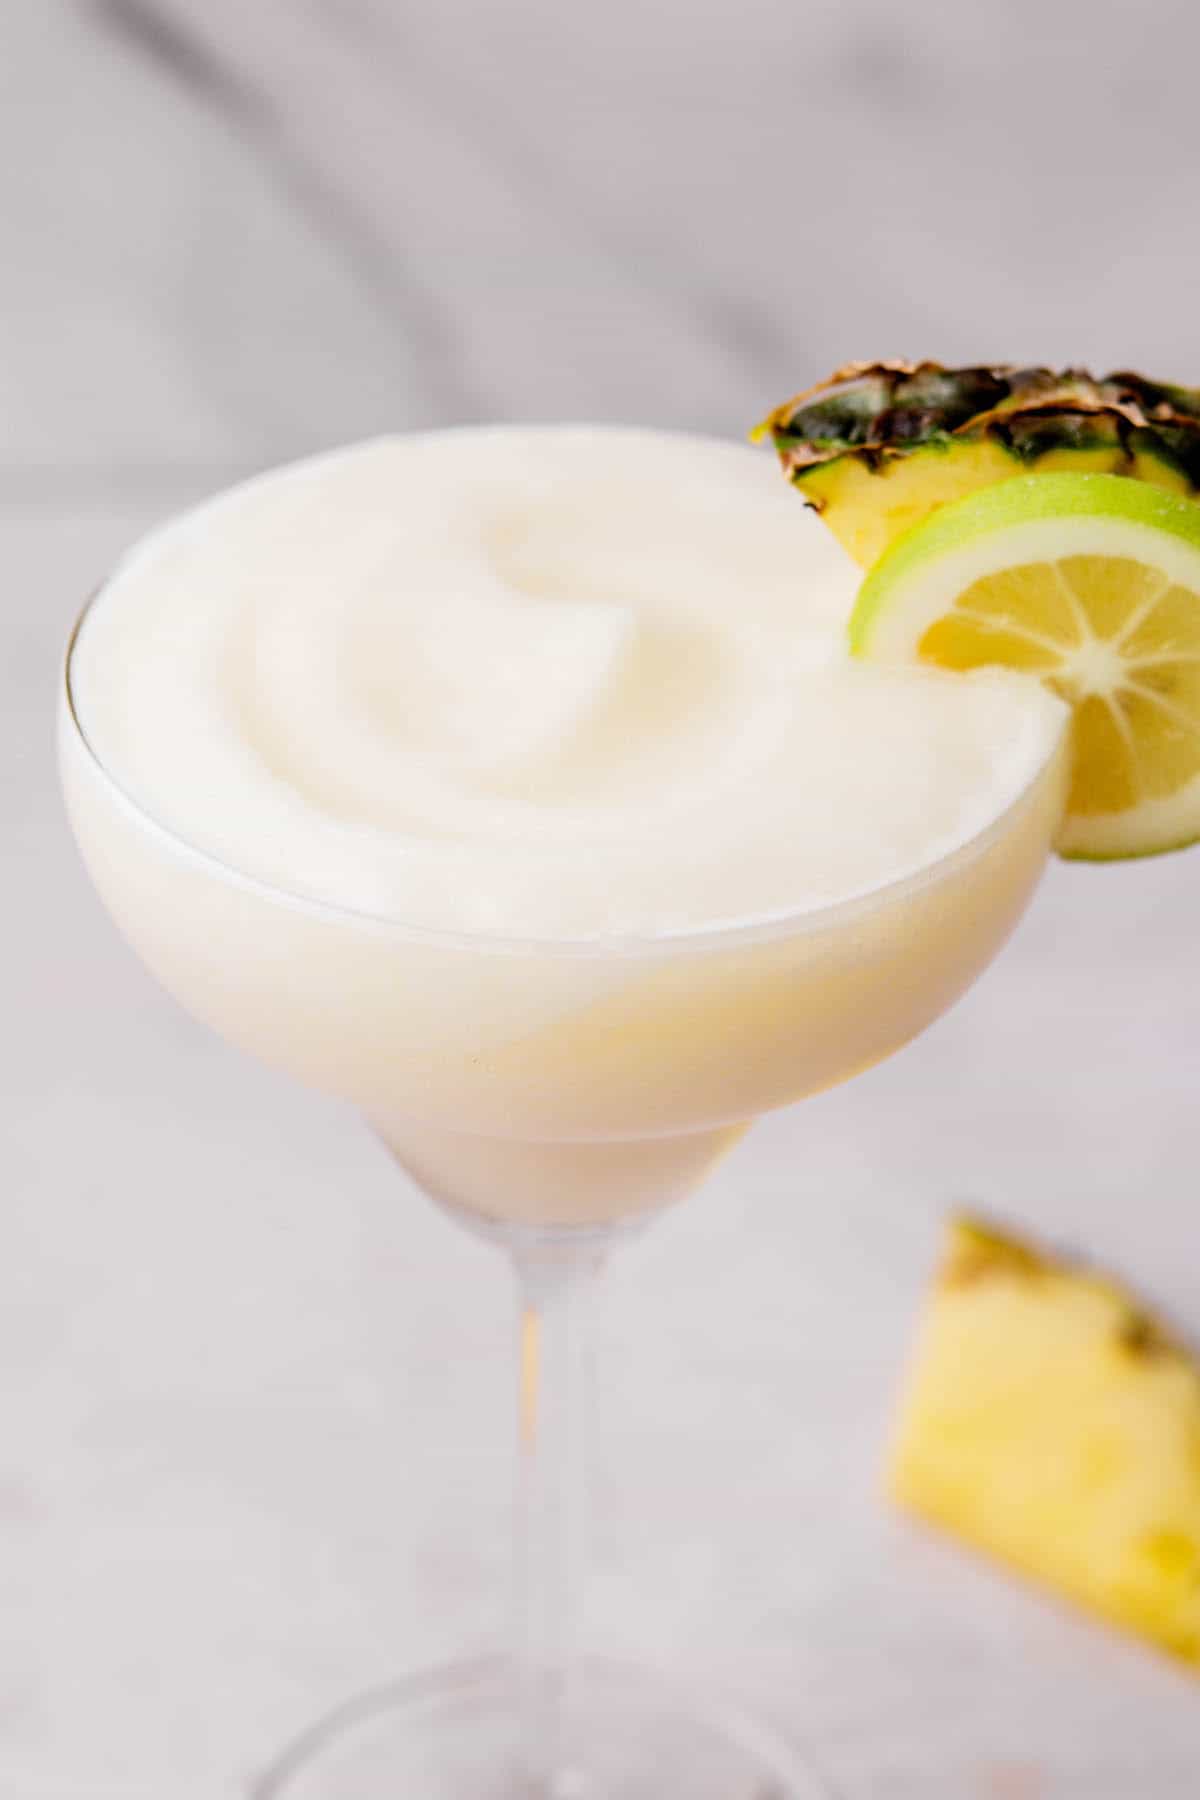 close up of a pina colada with tequila and pineapple wedge as garnish.